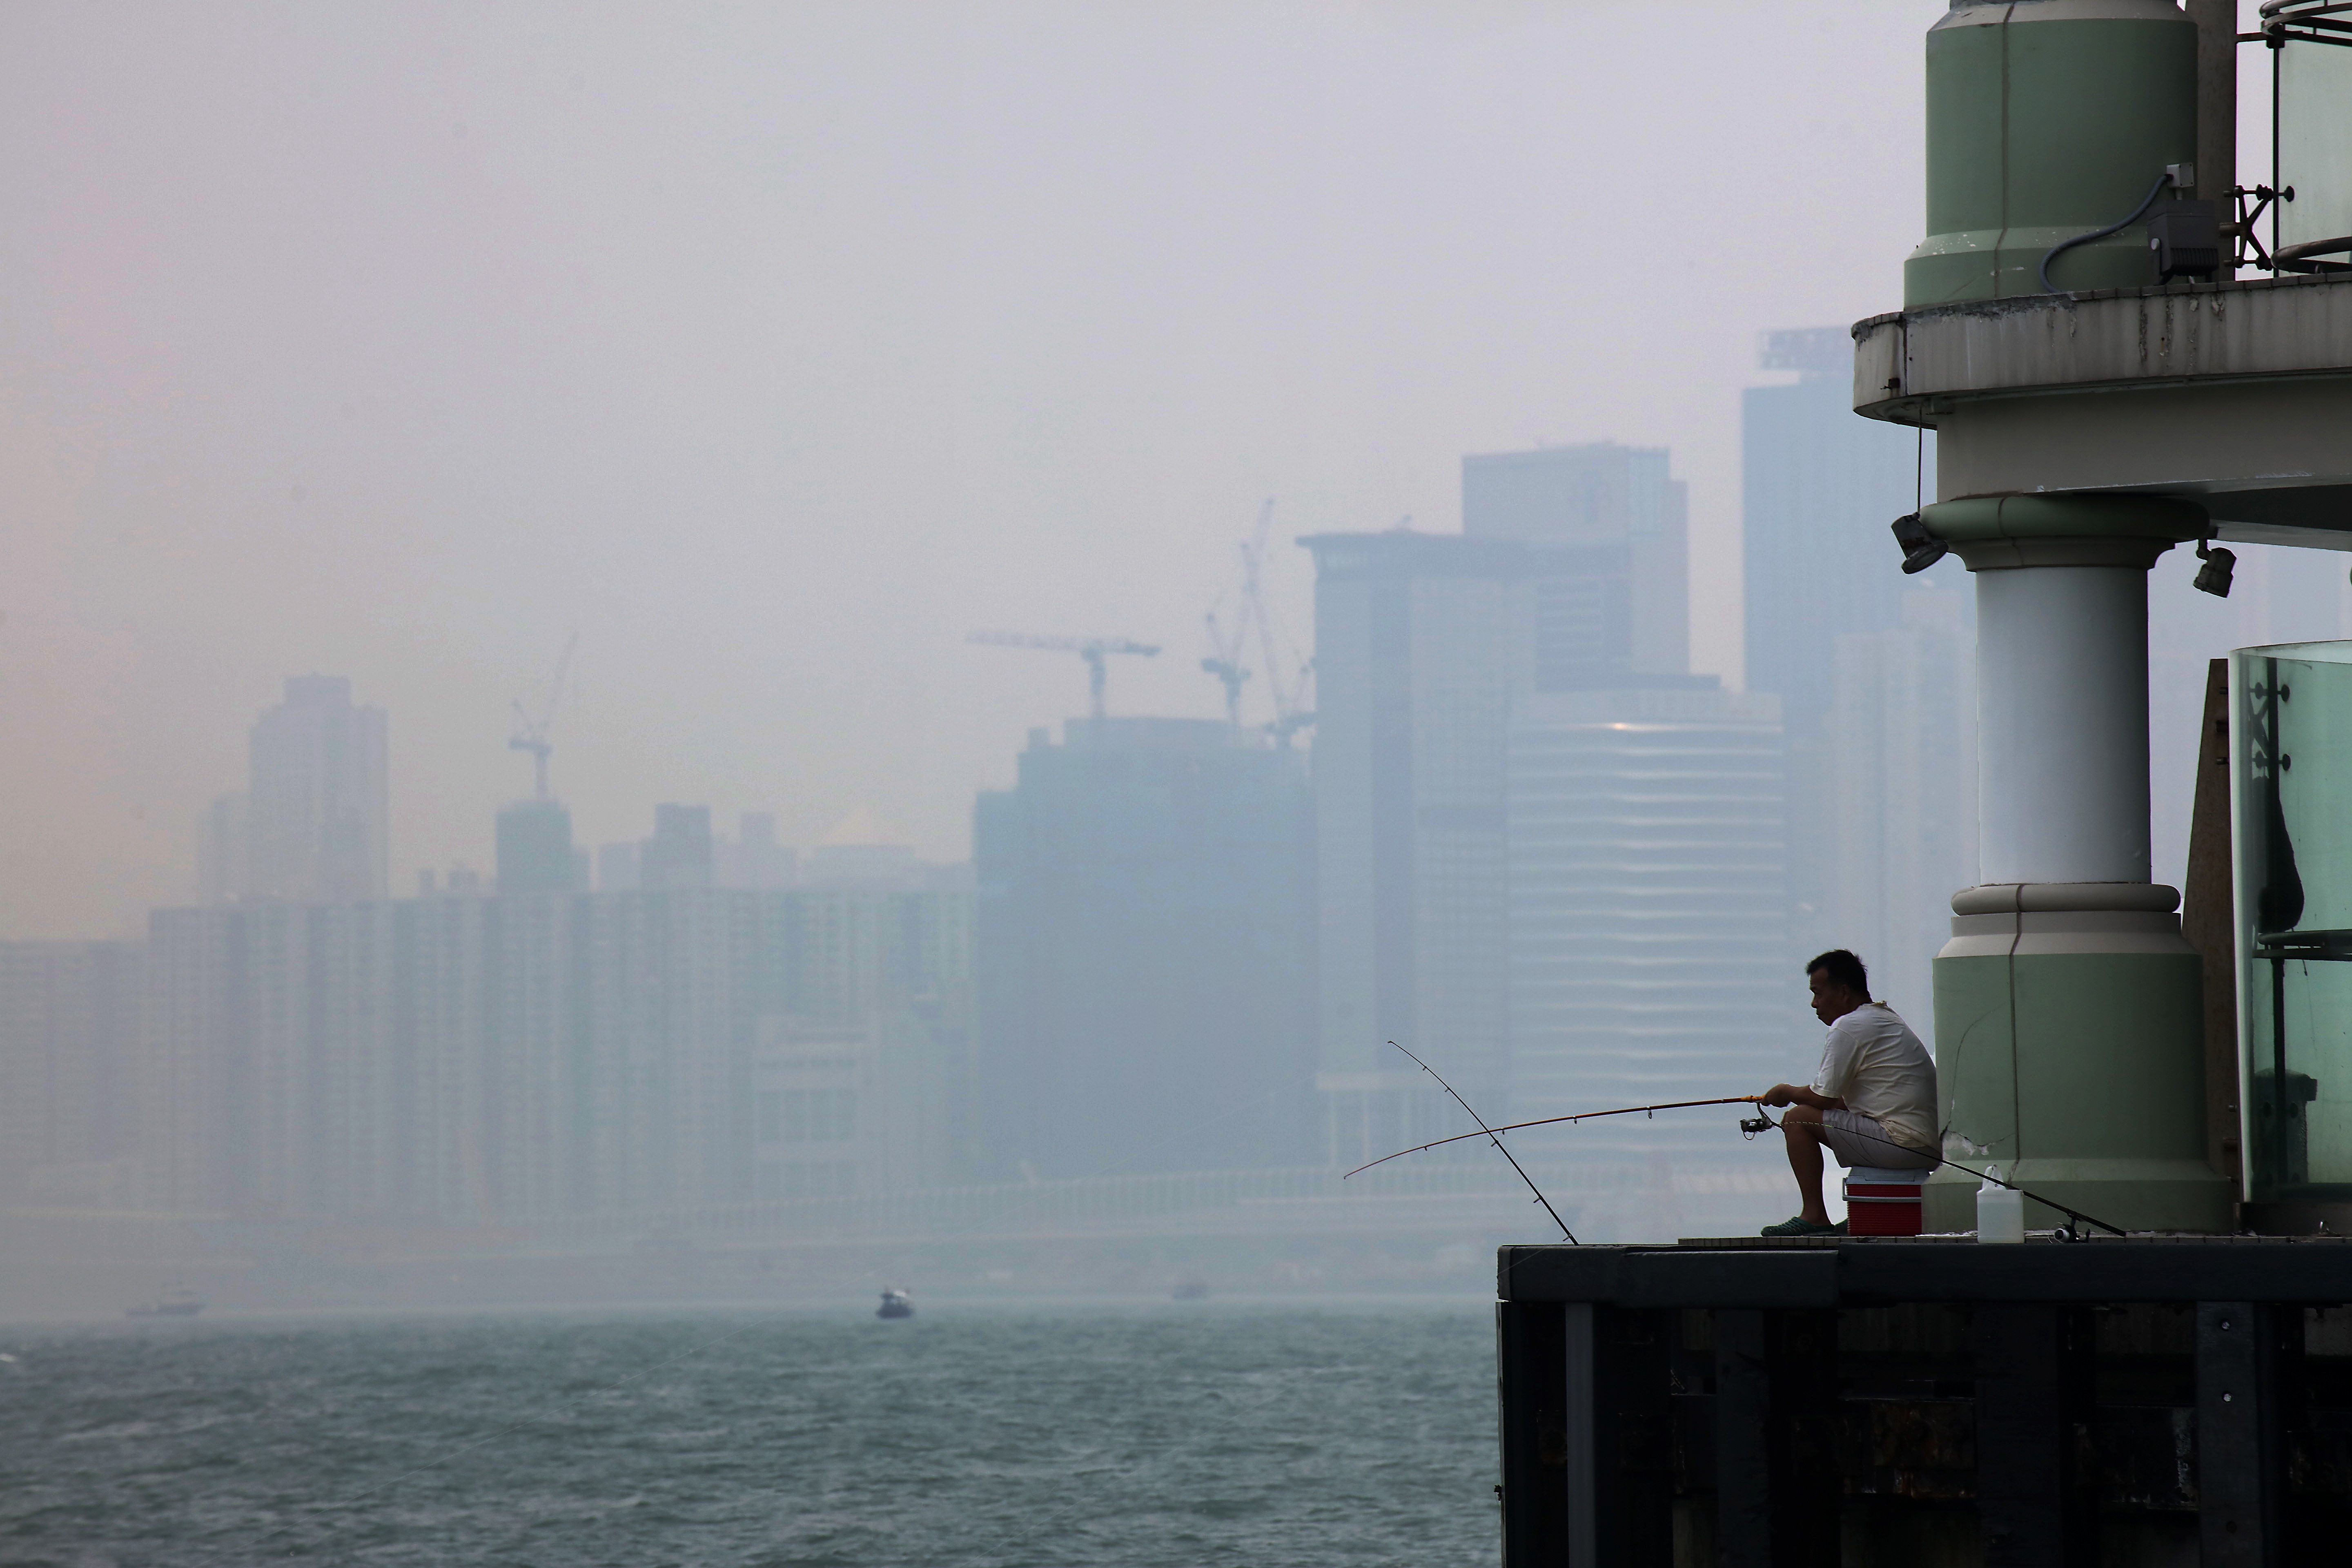 A local resident fishes at Victoria Harbour in July 2017, on a day when Hong Kong recorded “very high” to “serious” levels of air pollution across the city. Photo: Felix Wong